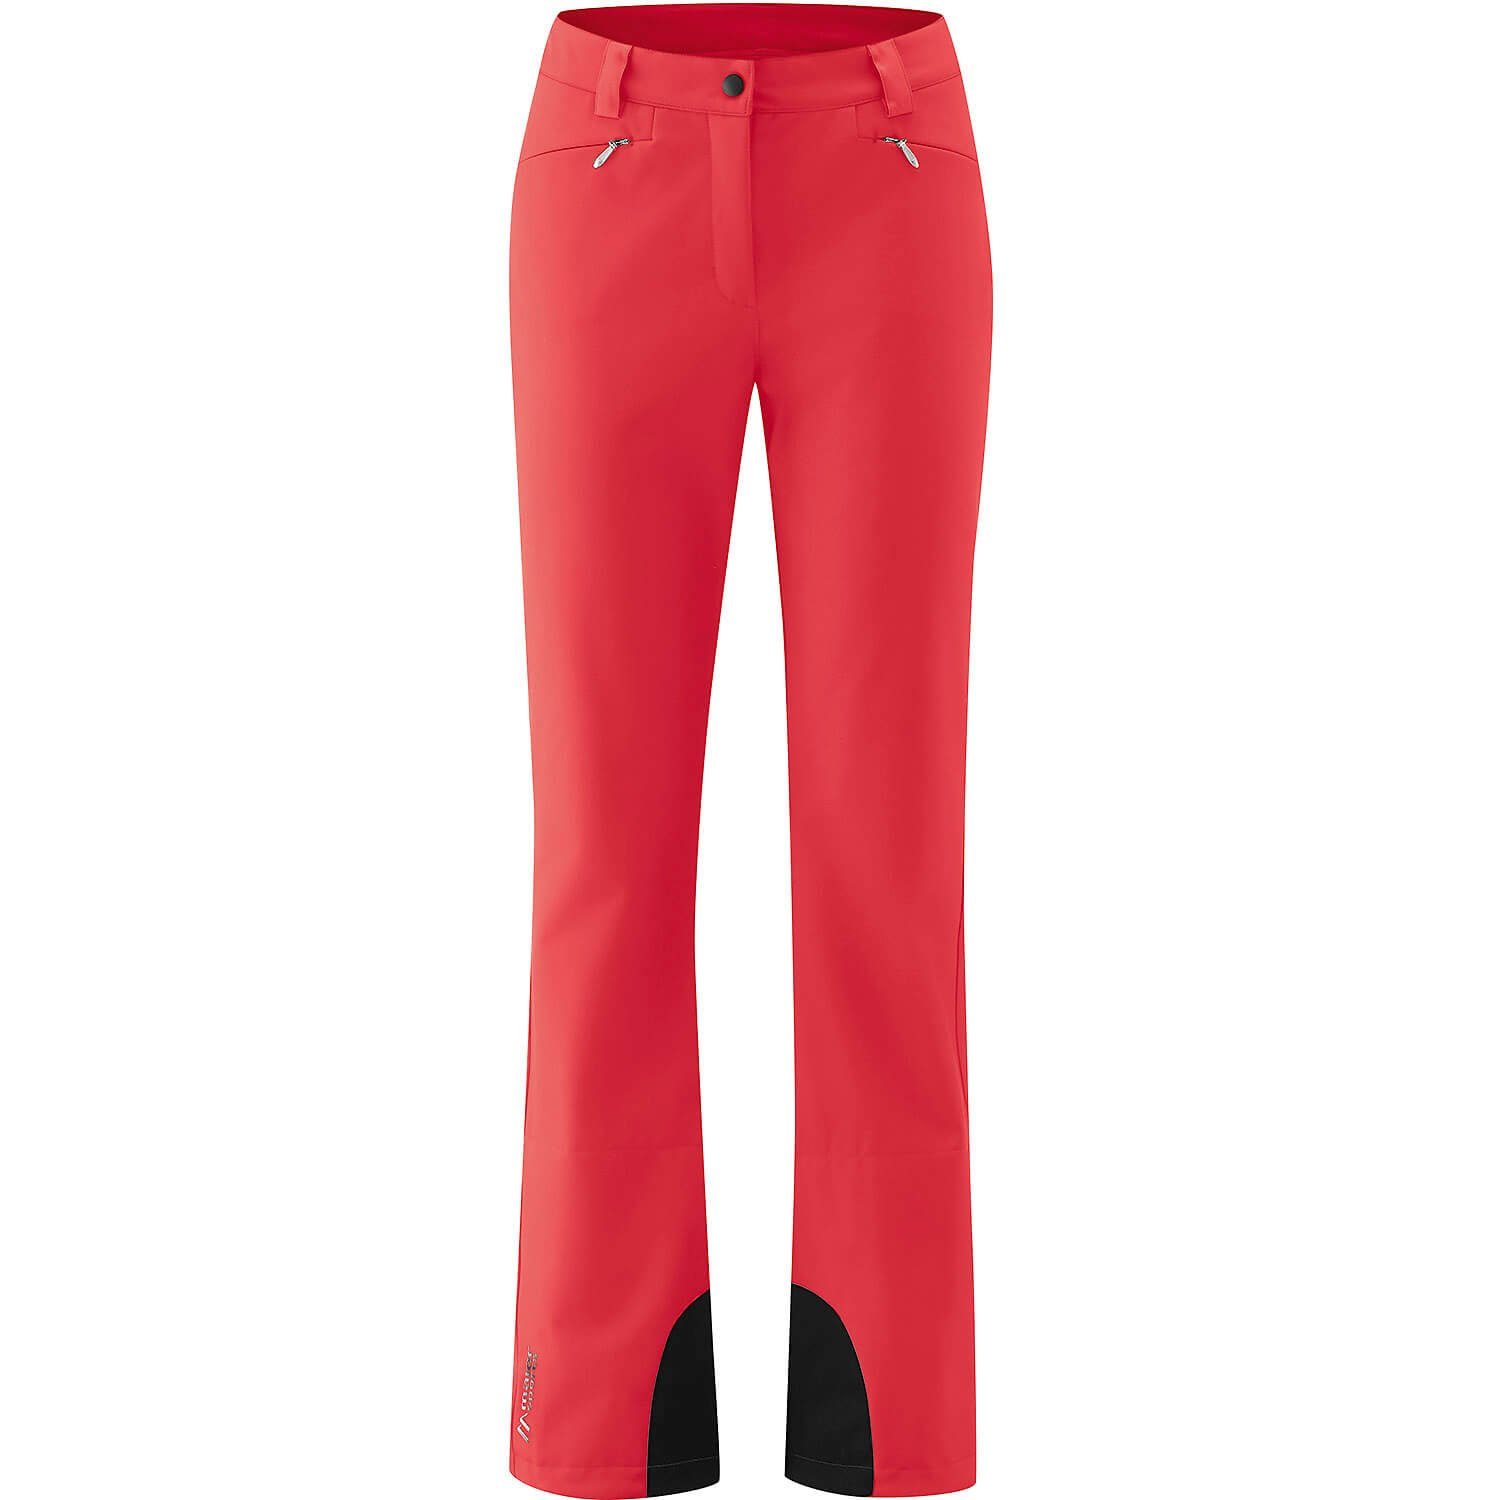 Fire Mary Red Softshellhose Maier Sports Funktionshose